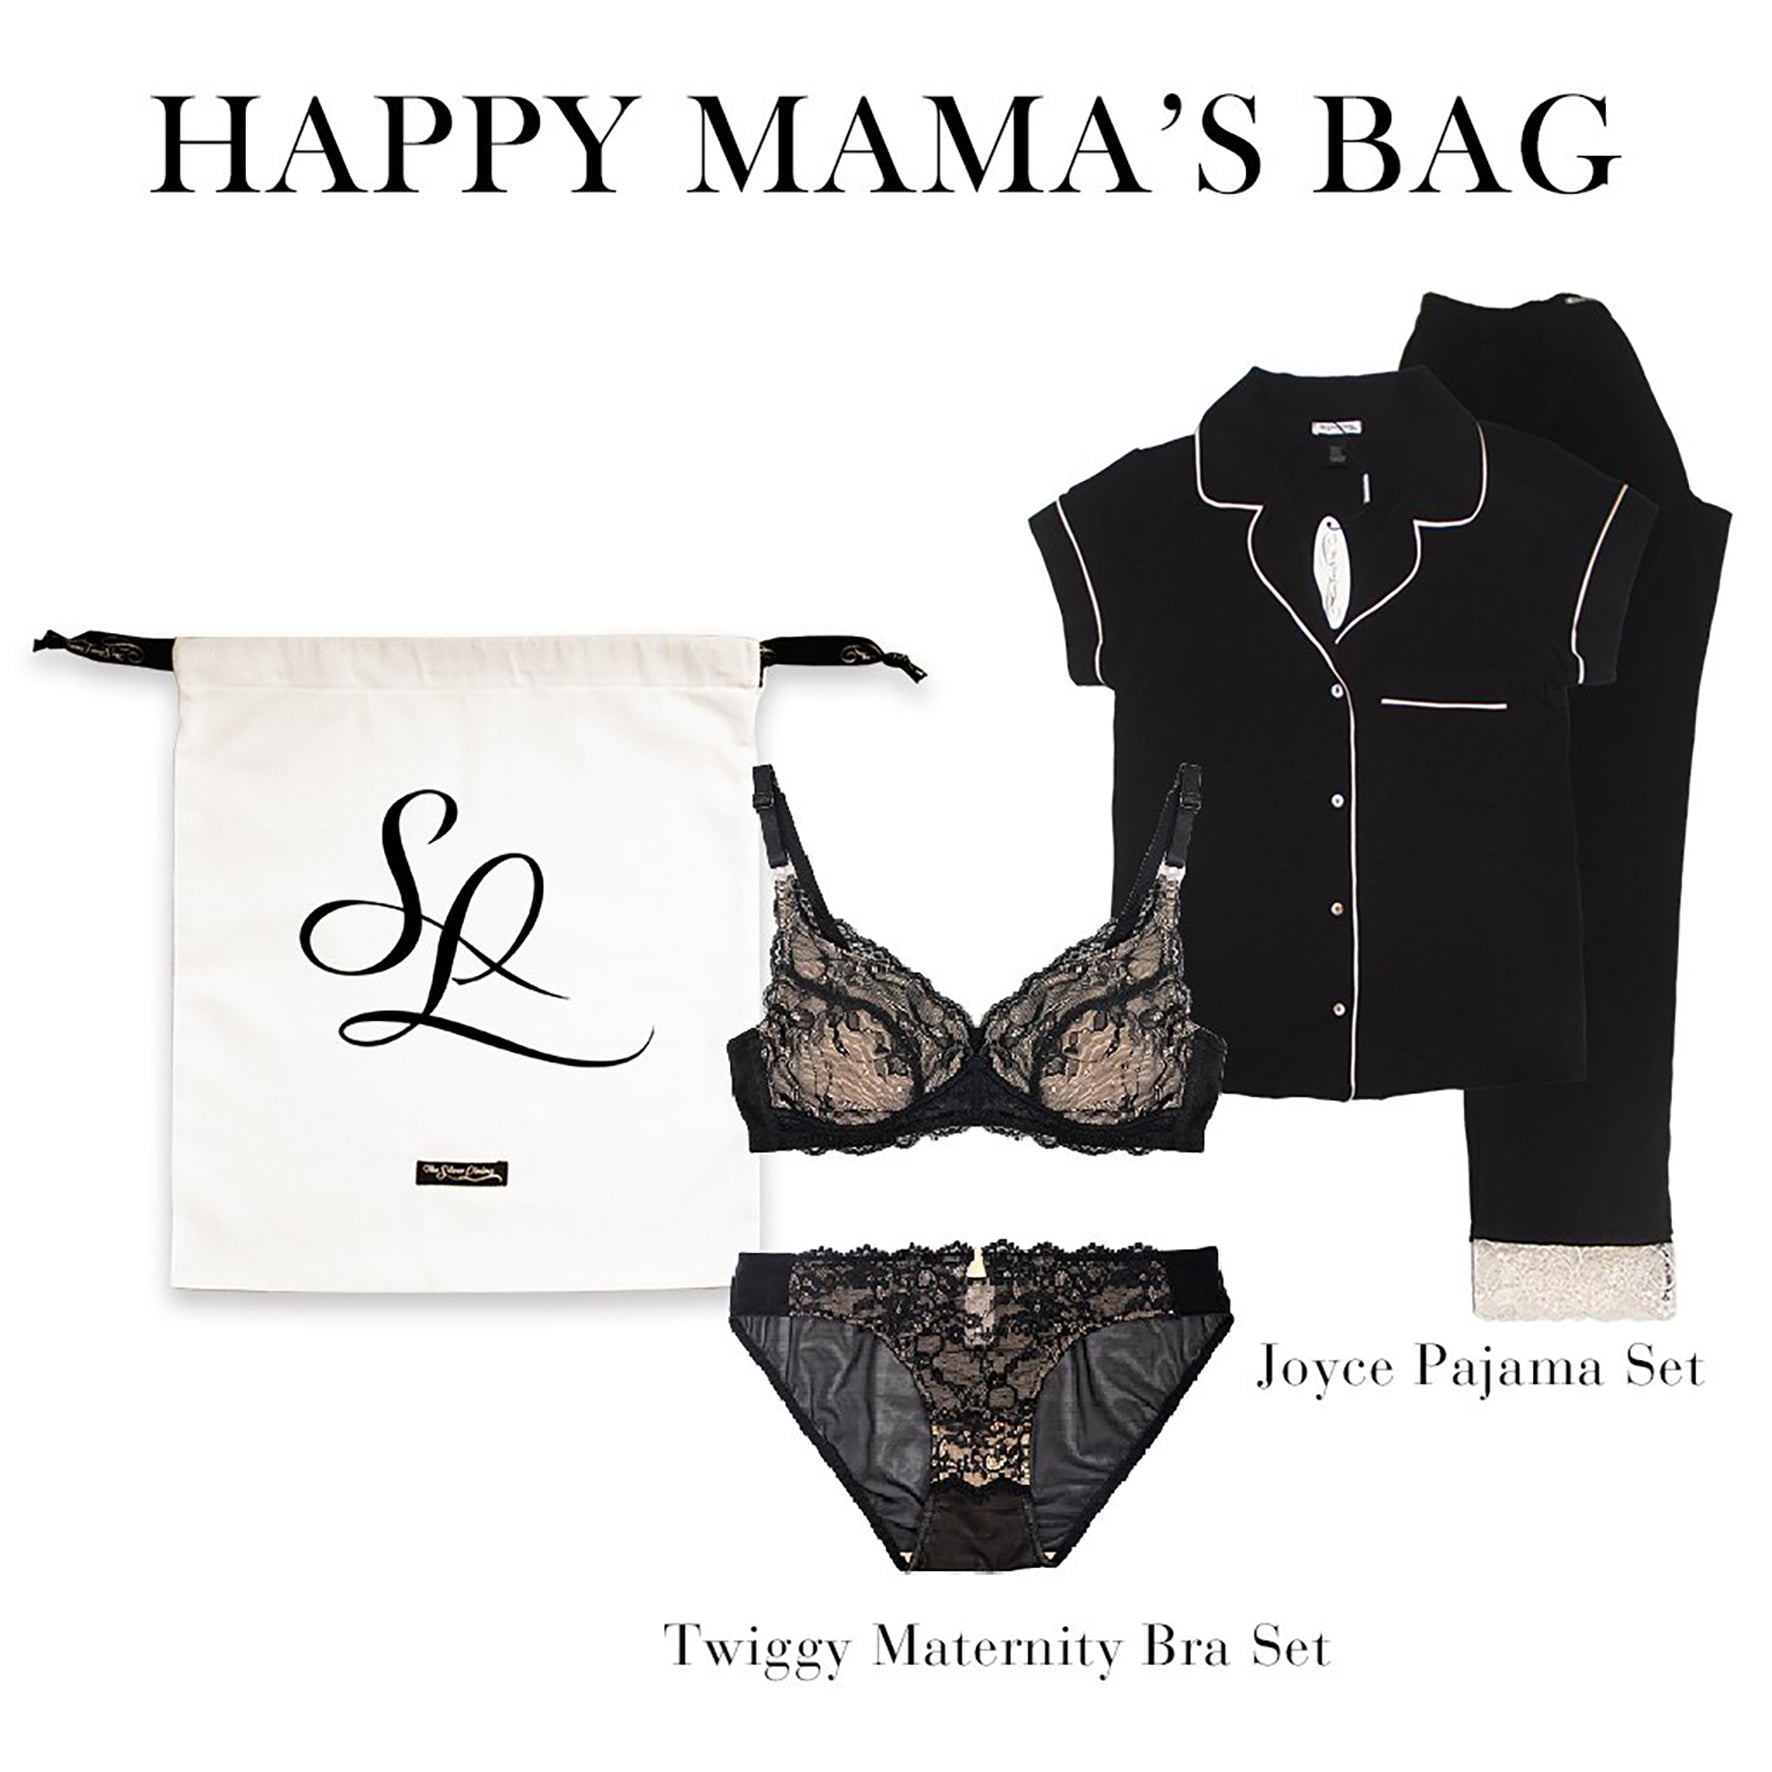 Happy Mama's Bag – Silver Lining Lingerie